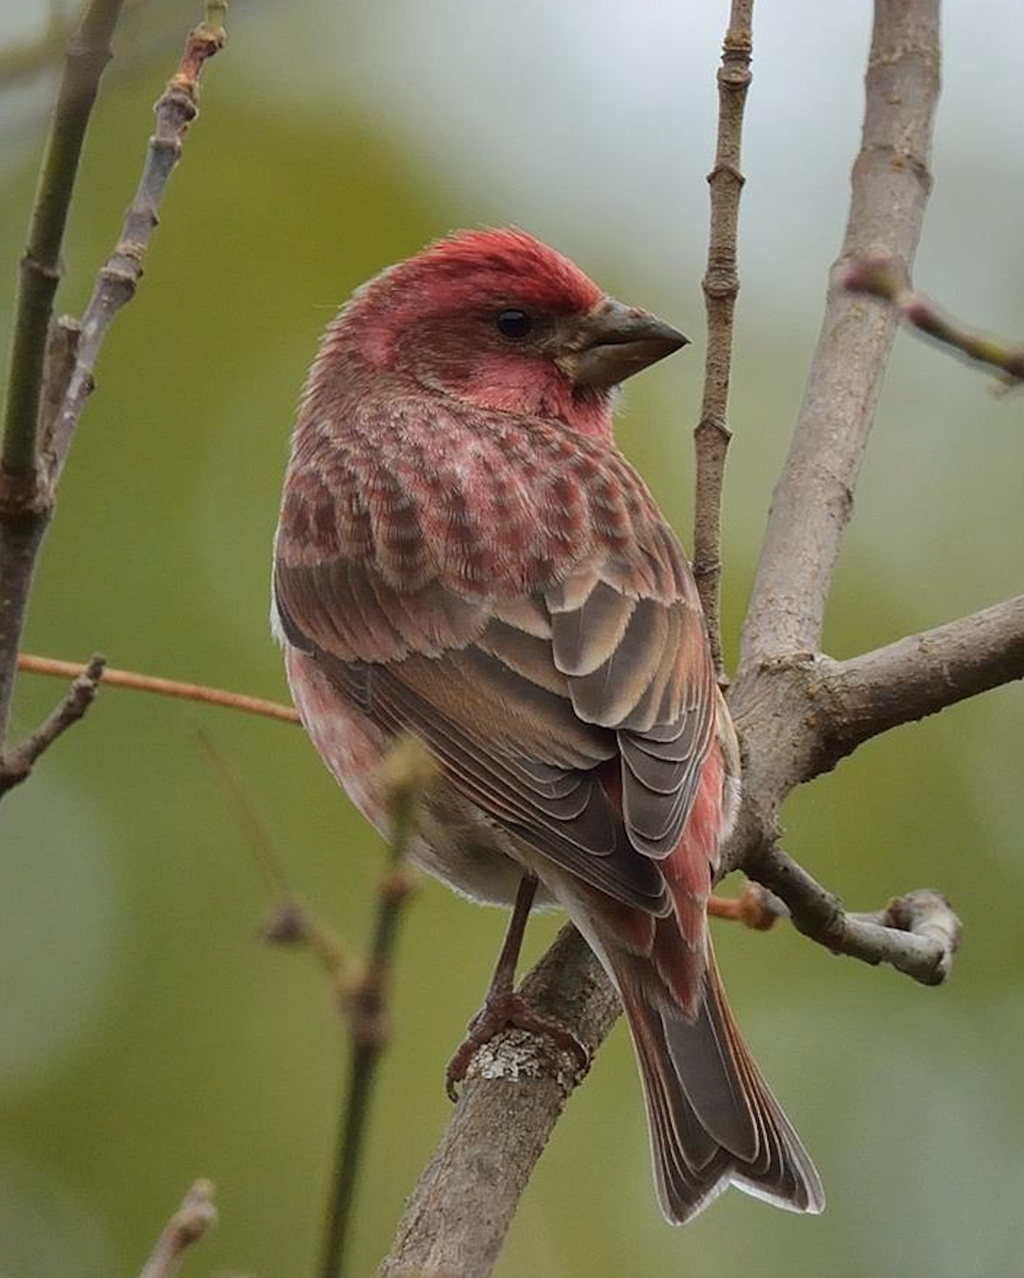 A male Purple Finch poses on a branch